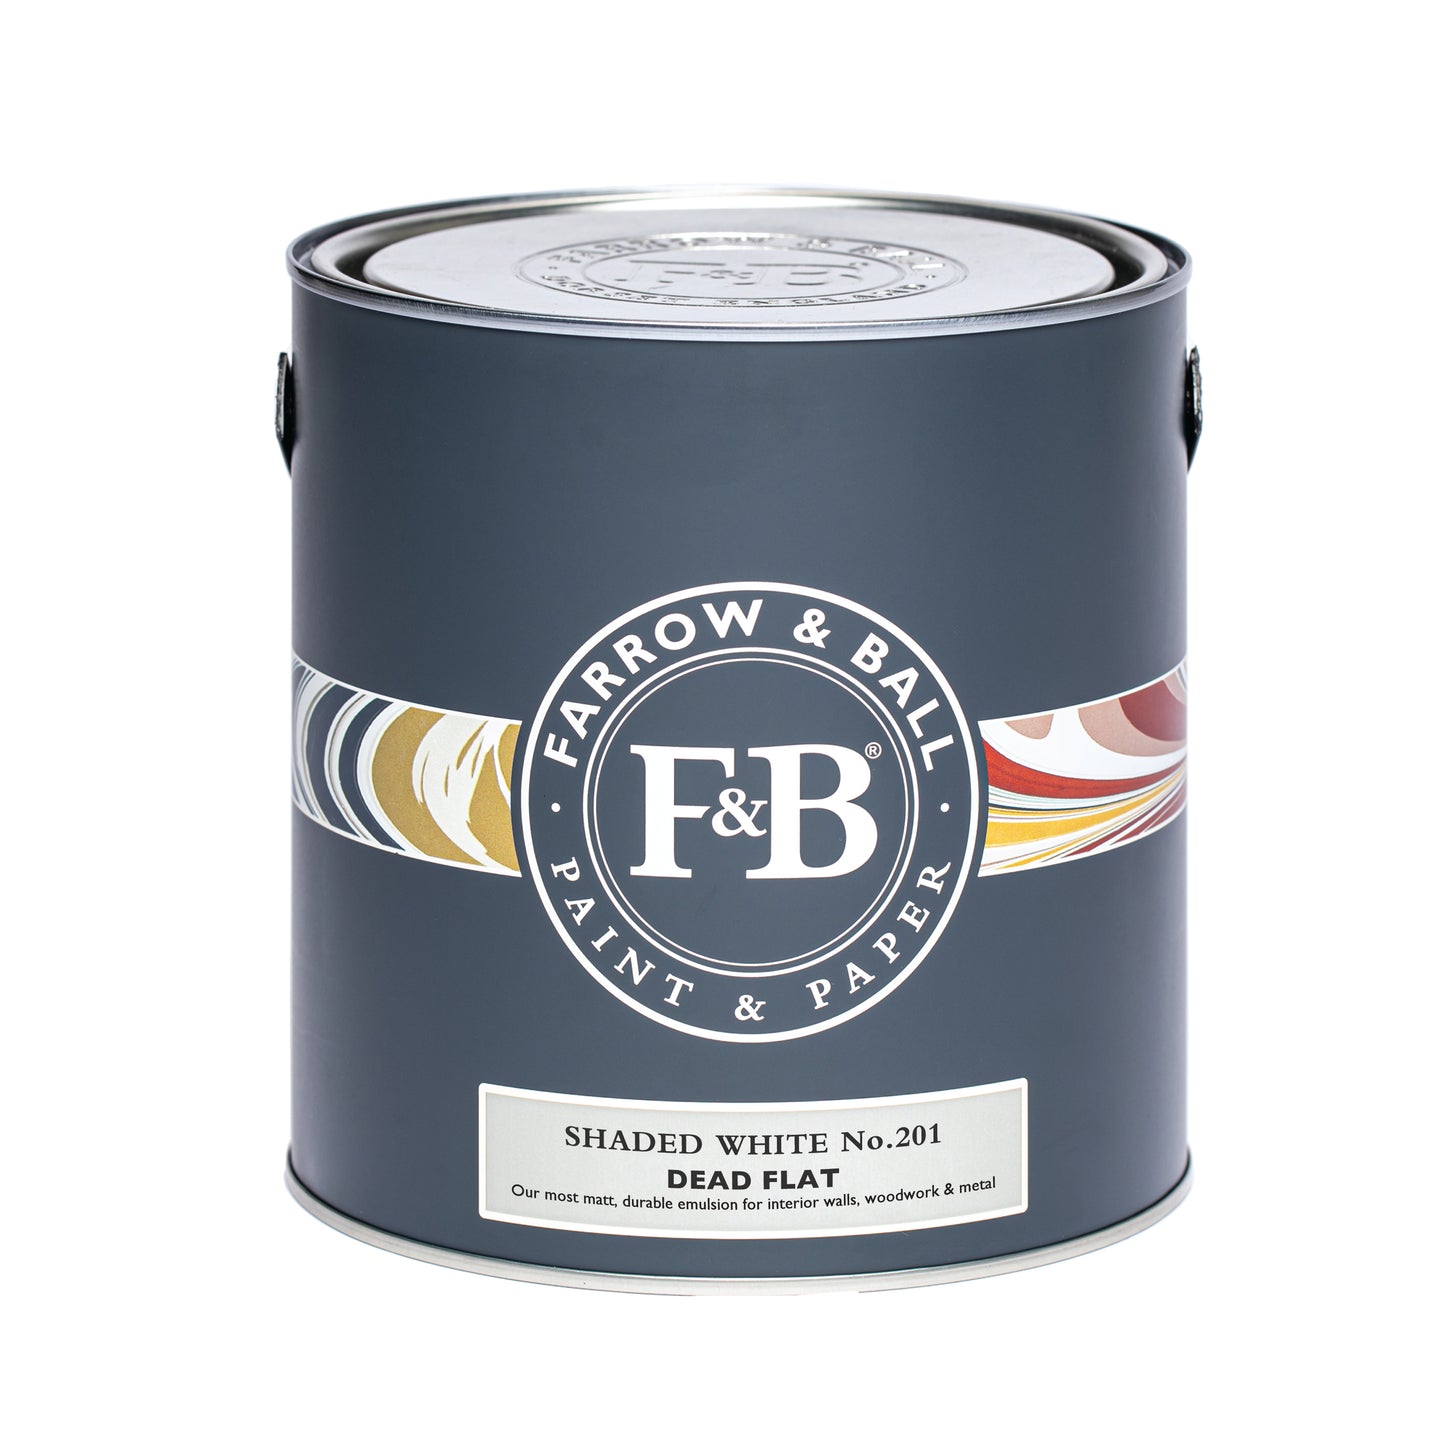 Shaded White 201 - Farrow and Ball - New Dead Flat